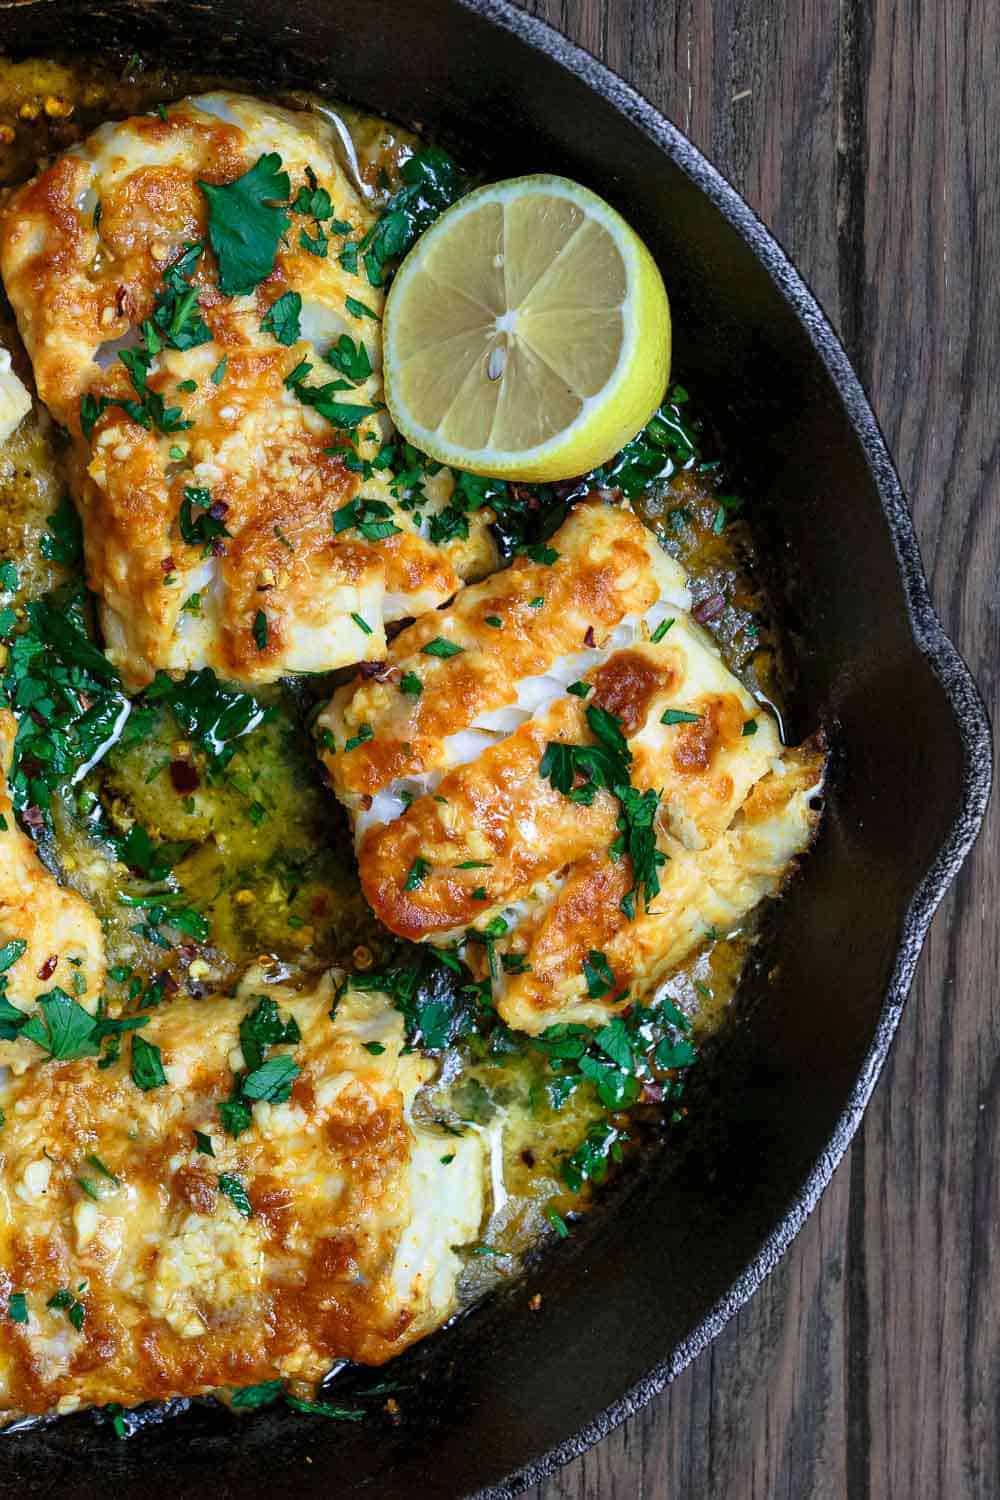 Baked cod recipe with lemon and garlic served in cast-iron skillet